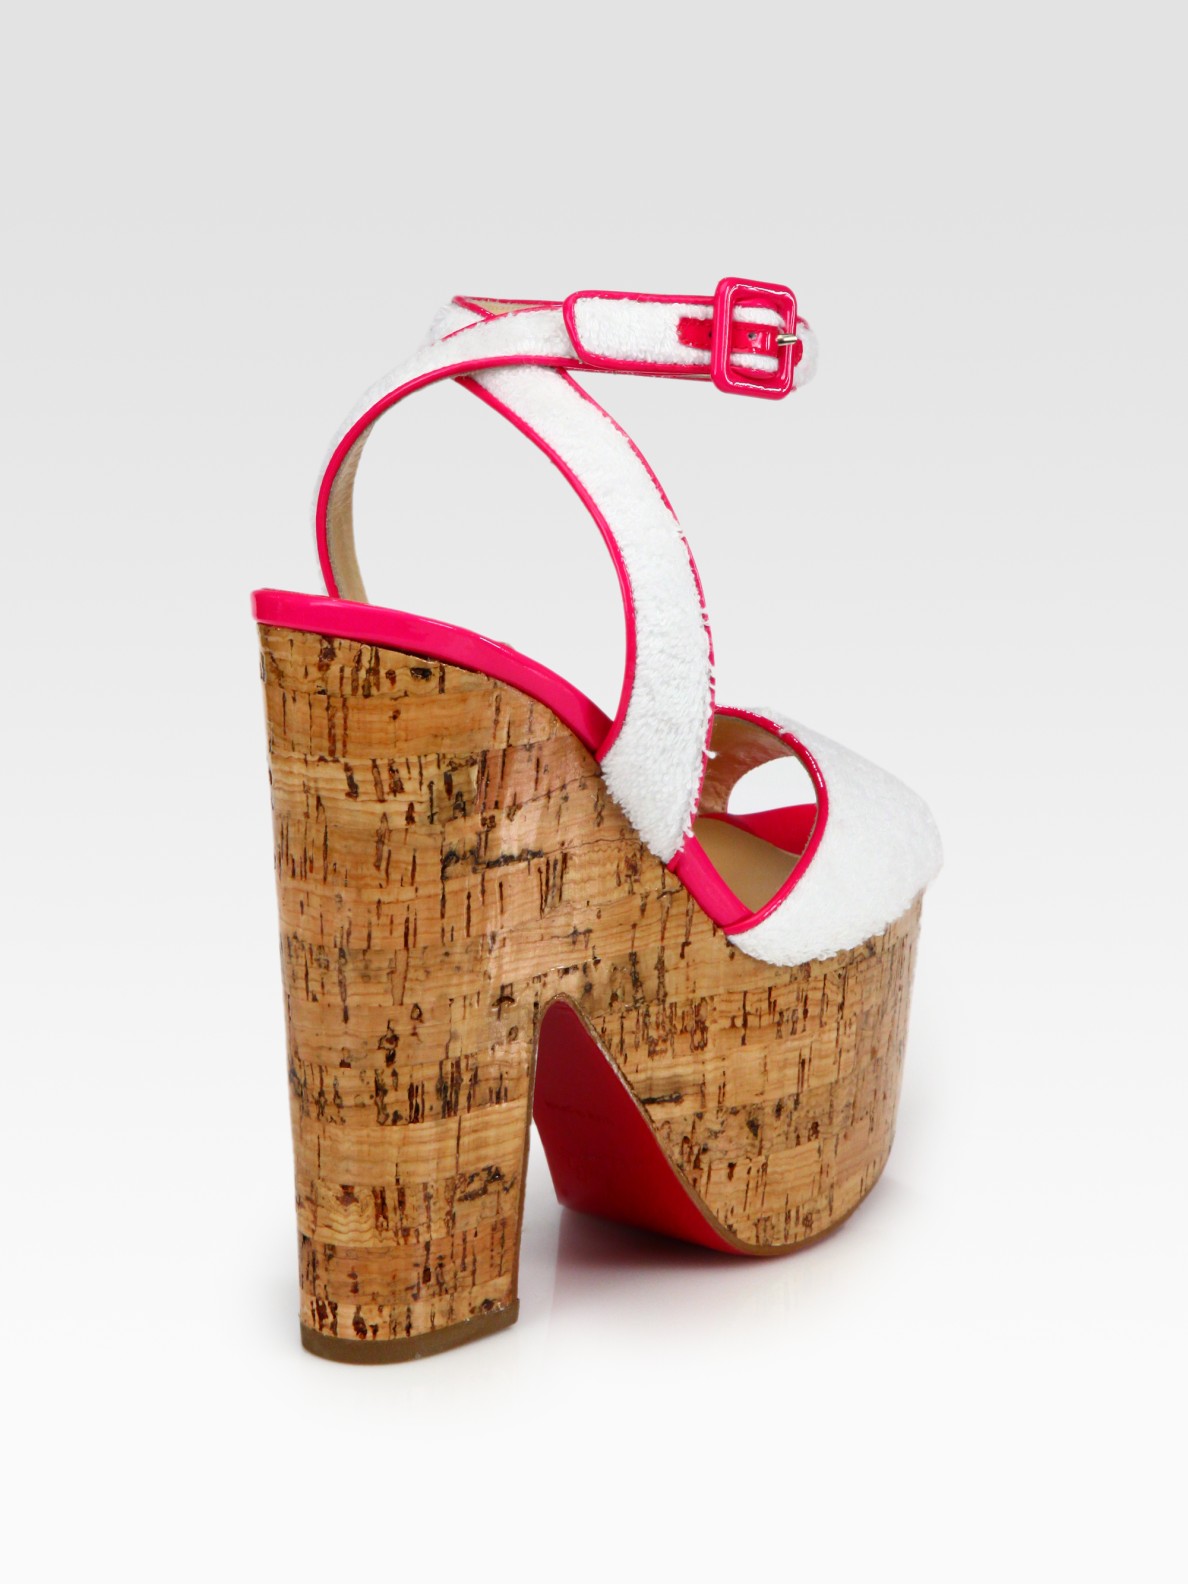 christian louboutin replicas shoes - christian louboutin platform sandals Ivory terry cloth covered ...